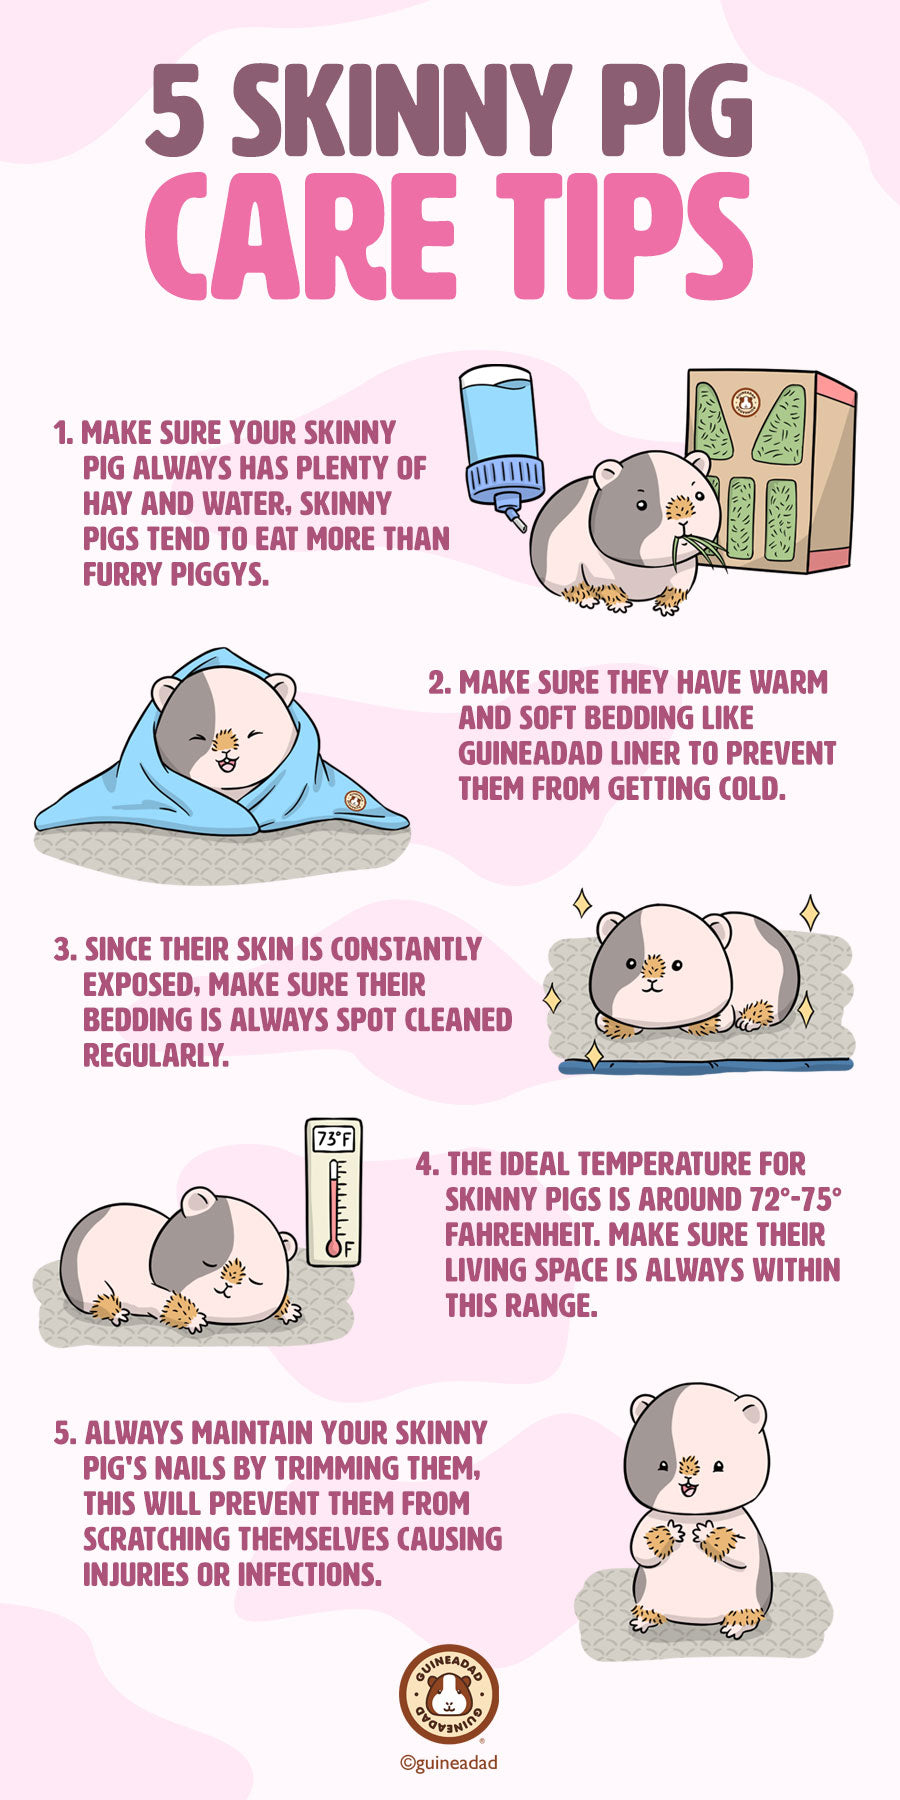 5 Skinny Pig Care Tips - 1. Make sure your skinny pig has enough water. 2. Make sure they have high-quality bedding that's soft and warm, like GuineaDad's Premium Liner. 3. Clean their bedding often. 4. Keep their home's temperature between 72-75 degrees Fahrenheit ( Celcius) 5. Always maintain your guinea pig's nails and keep them trimmed to prevent cutting themselves while scratching.